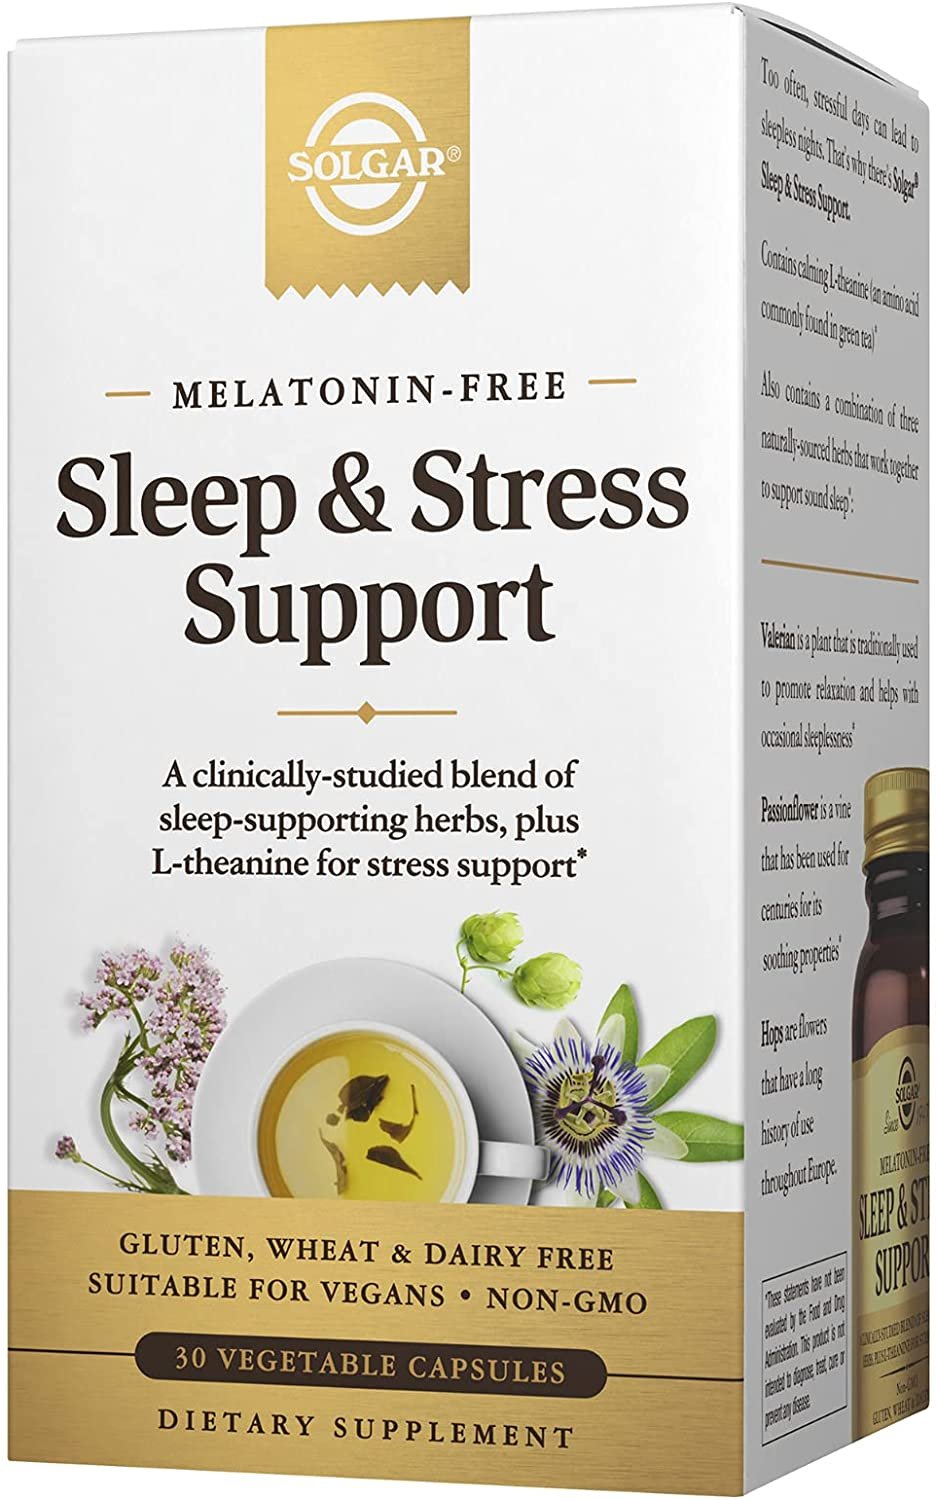 Solgar Sleep & Stress Support, Vegetable Capsules, Melatonin Free, Helps Relax, Calm You, Fall Asleep Quickly, Improve Sleep Quality with Valerian, Passionflower, Hops, Non-GMO, 15 Servings, 30 Count